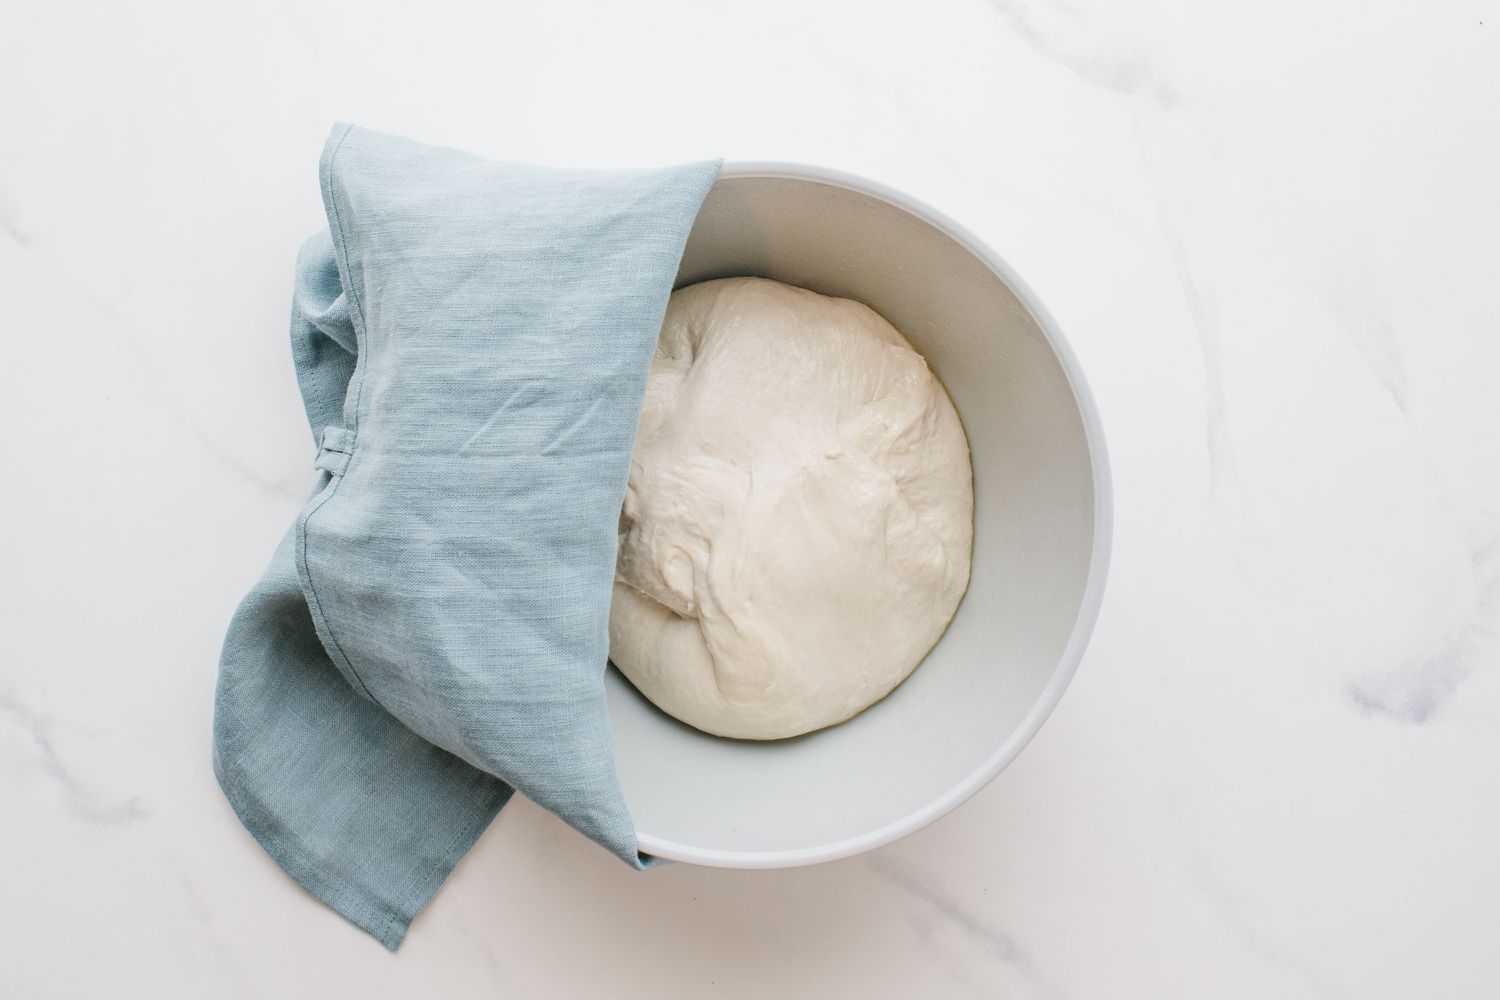 Dough in a bowl covered with a towel